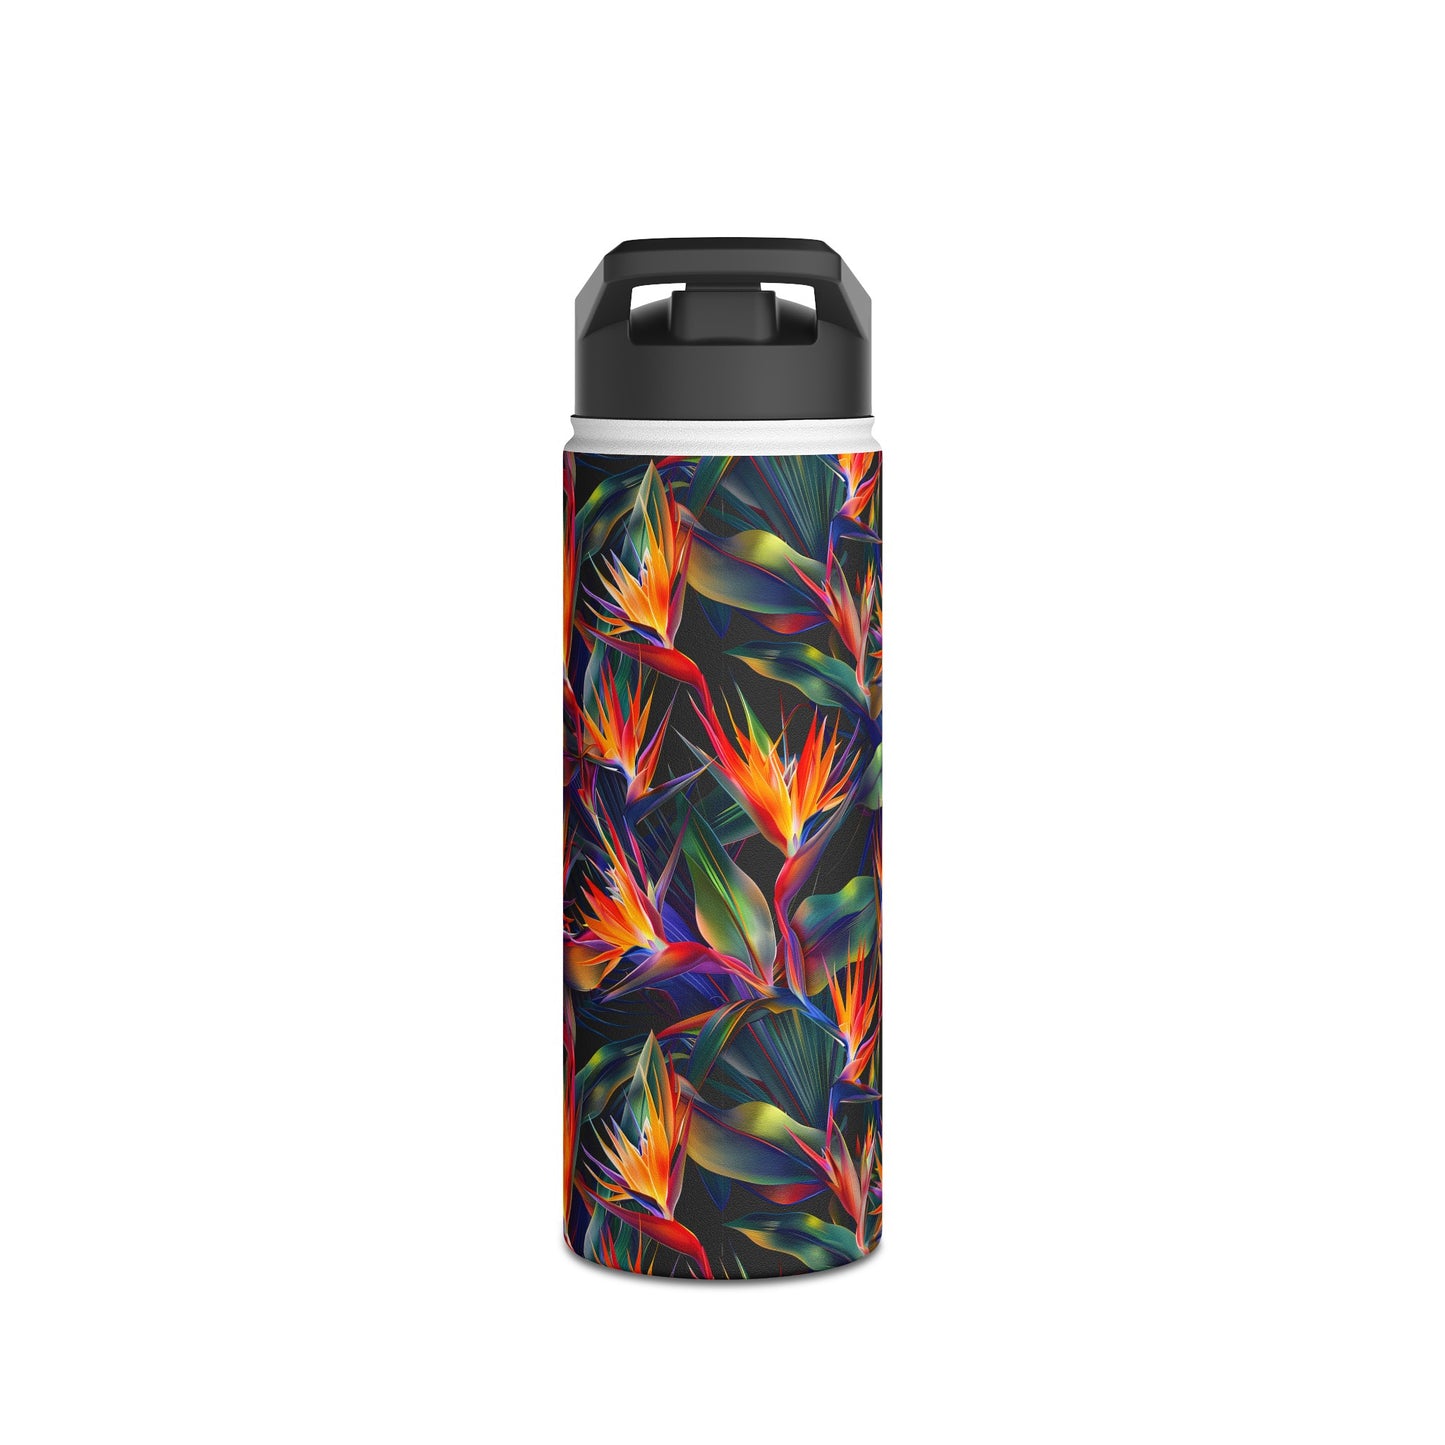 Stainless Steel Water Bottle Thermos, 18oz, Birds of Paradise - Double Wall Insulation Keeps Drinks Hot or Cold